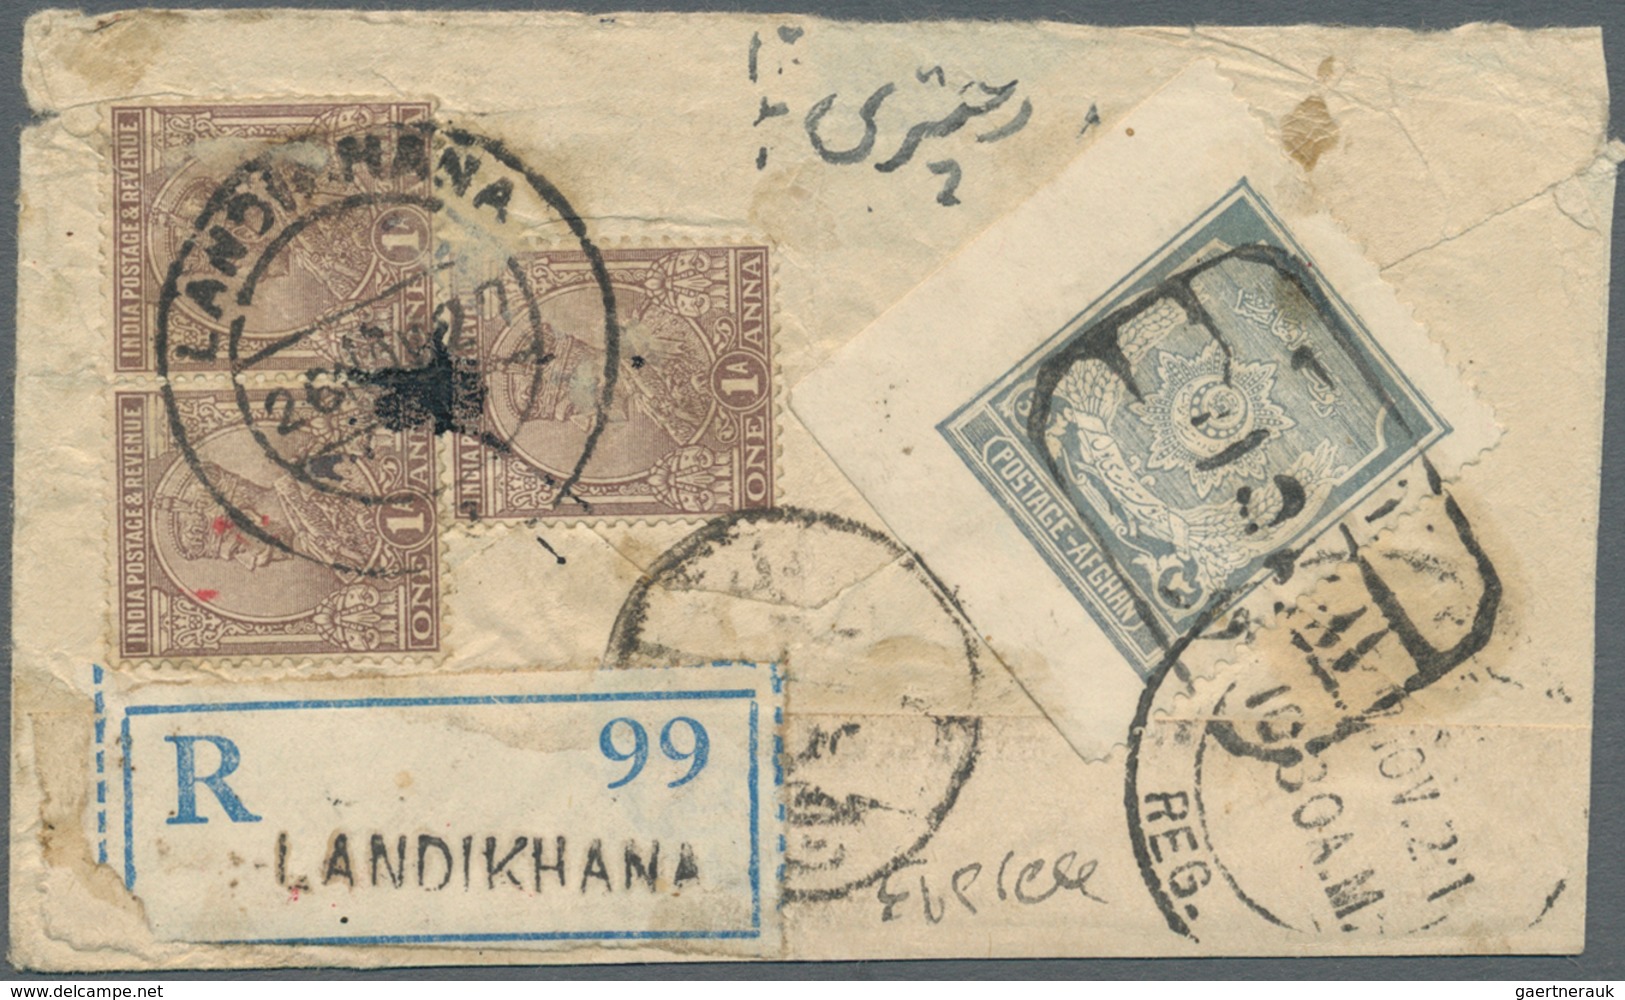 Afghanistan: 1909-1928: Collection of 19 pre-UPU covers to India, from the Kabul region via the nort